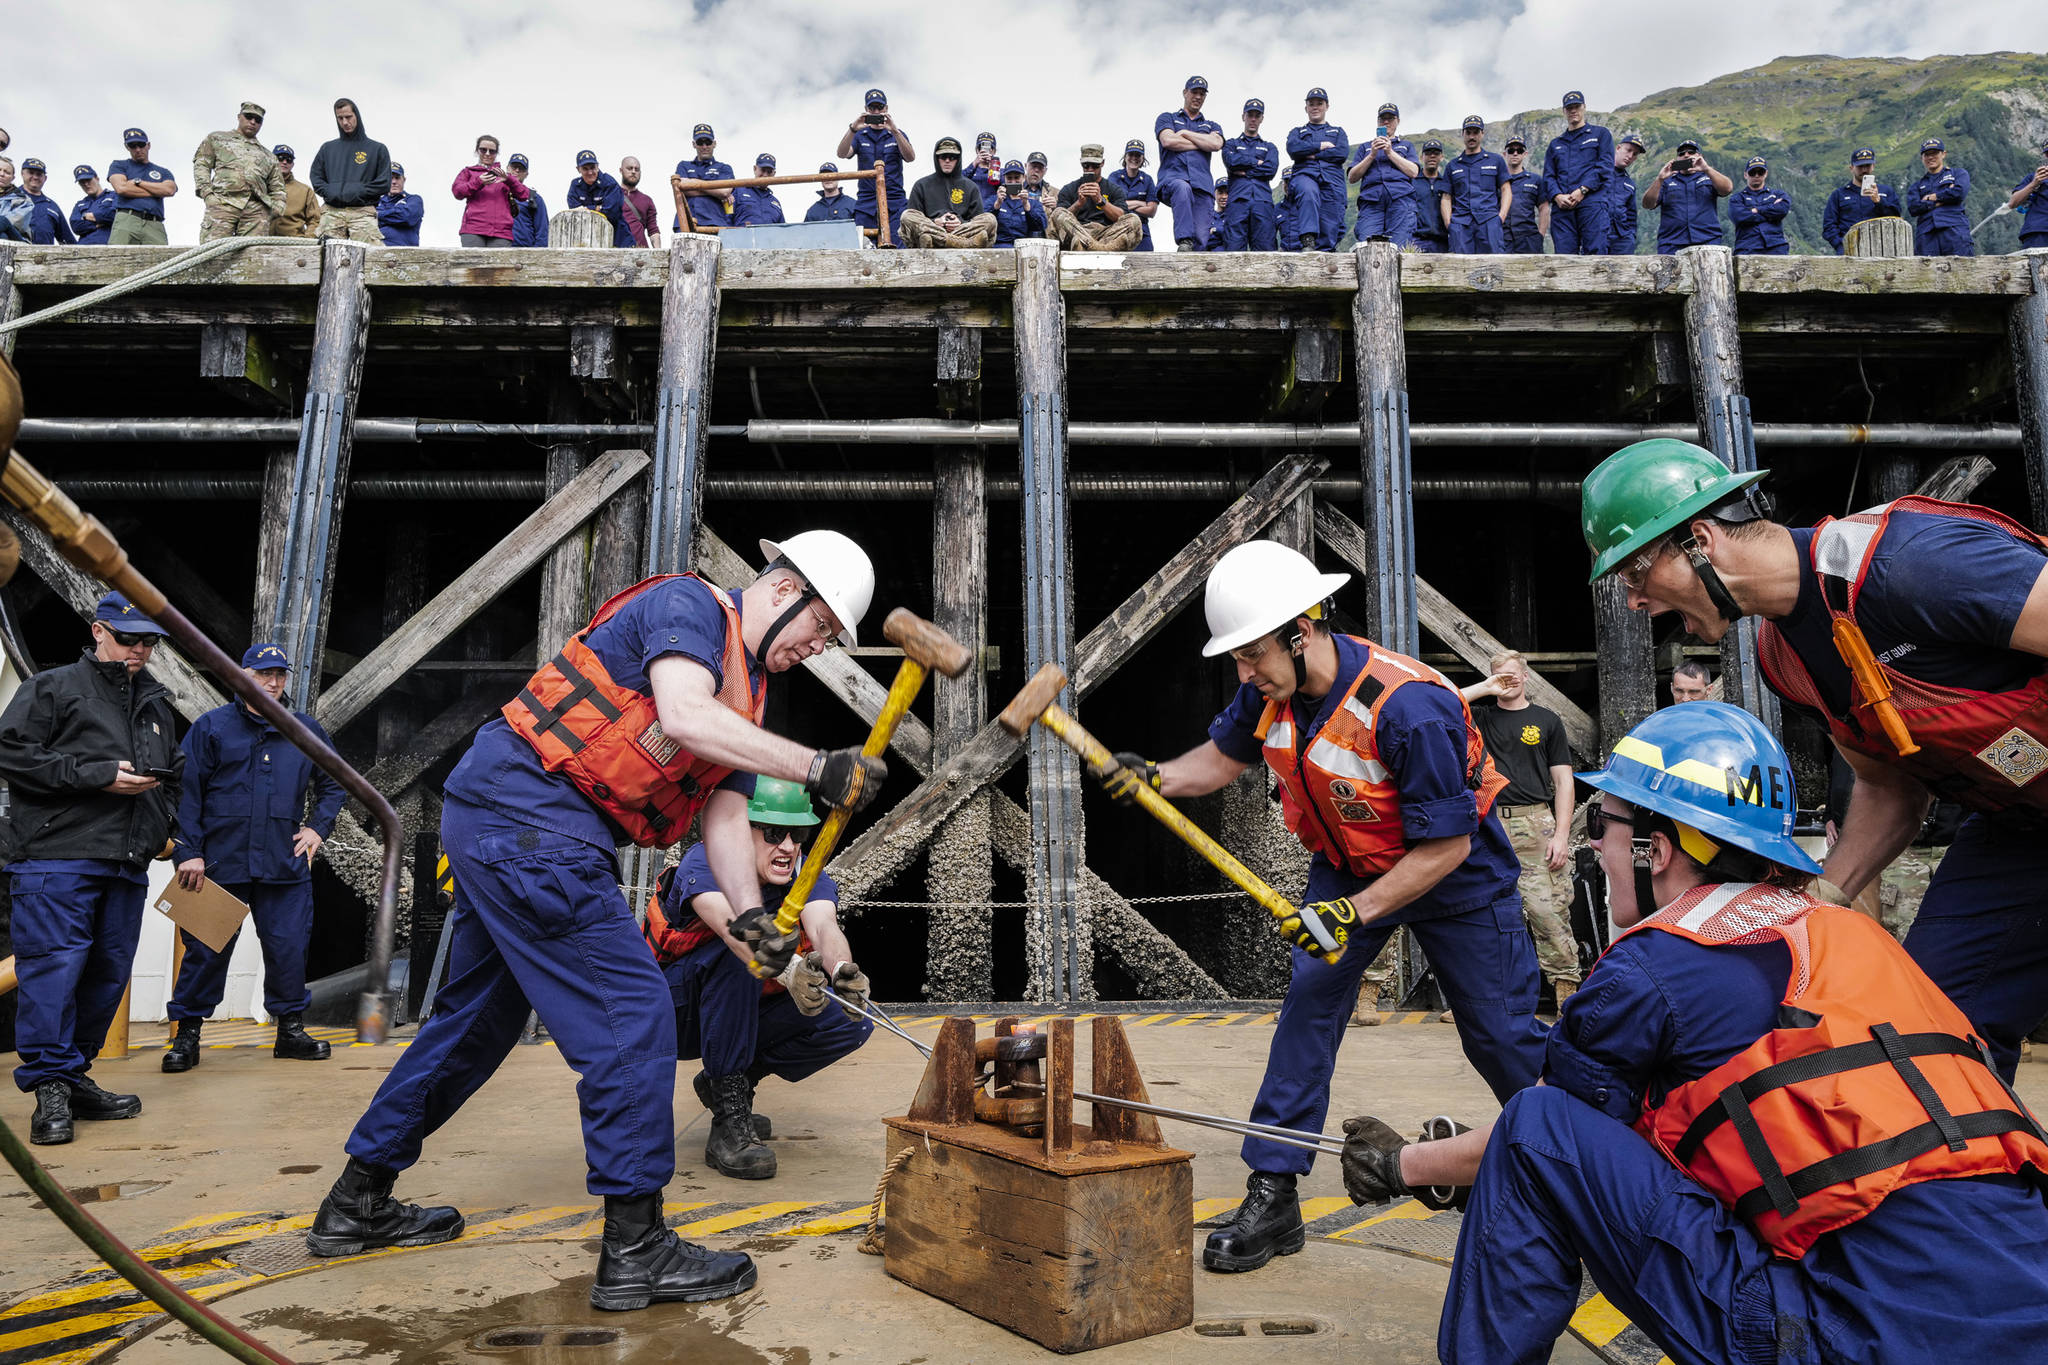 Members of the U.S. Coast Guard Cutter Kukui participate in the “heat and beat” contest during the annual Buoy Tender Olympics at Station Juneau on Wednesday, Aug. 21, 2019. Lt. Cdr. Ray Reichl, left, swings a sledge hammer with Lt. Cyrus Unvala as teammates Ens. Joseph Snyder and Ens. Victoria Sparacino hold the shackle and Enx. Reid Wiegleb yells encouragement. (Michael Penn | Juneau Empire)